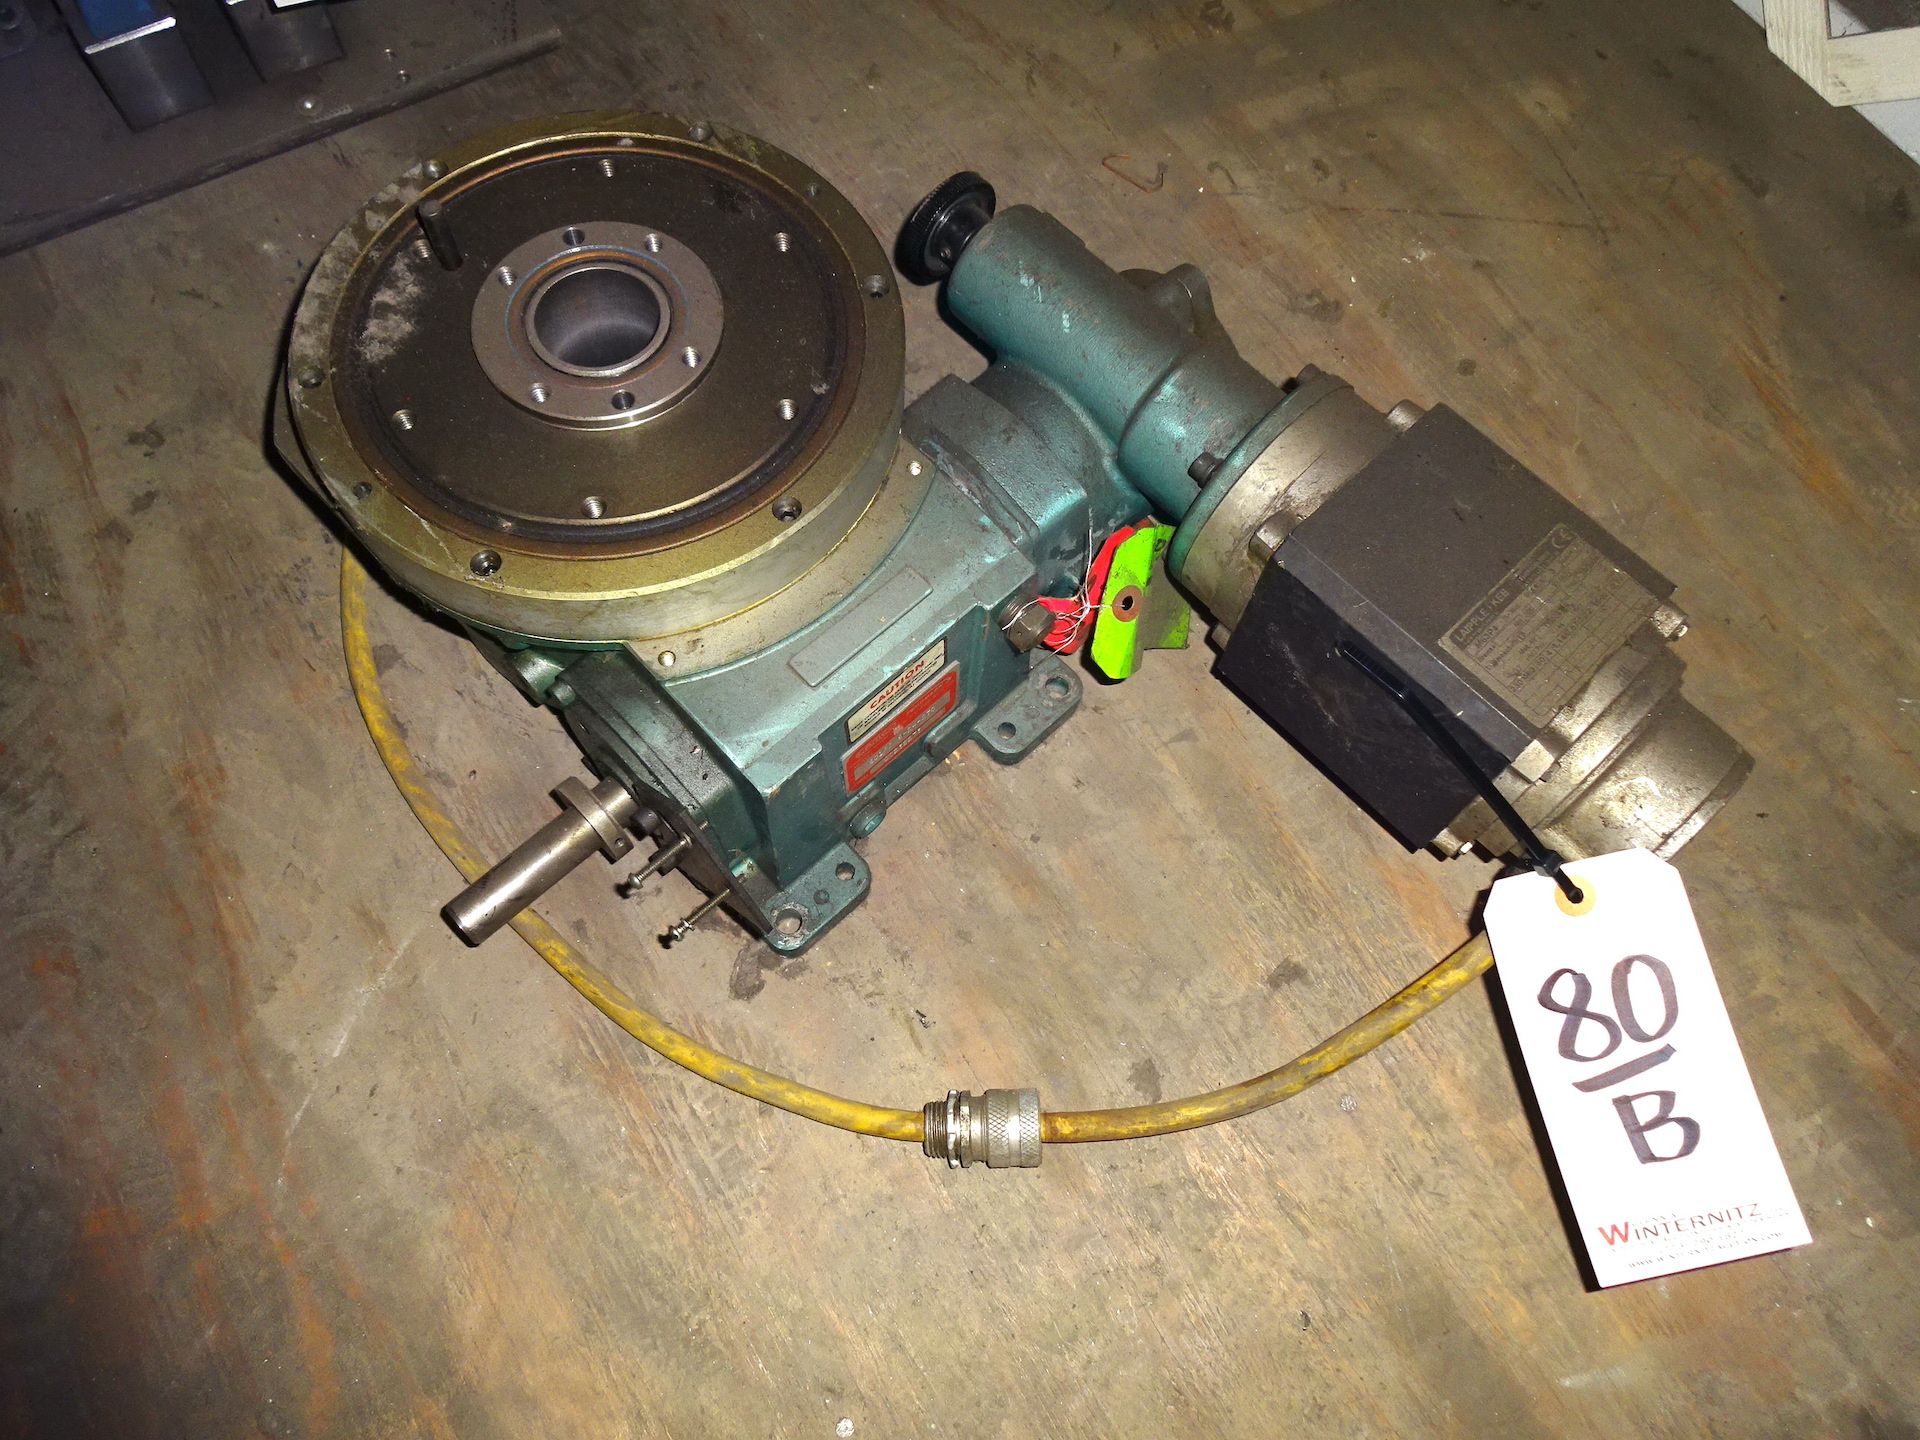 Camco Model 601RDM8H24-270 Rotary Drive Indexer